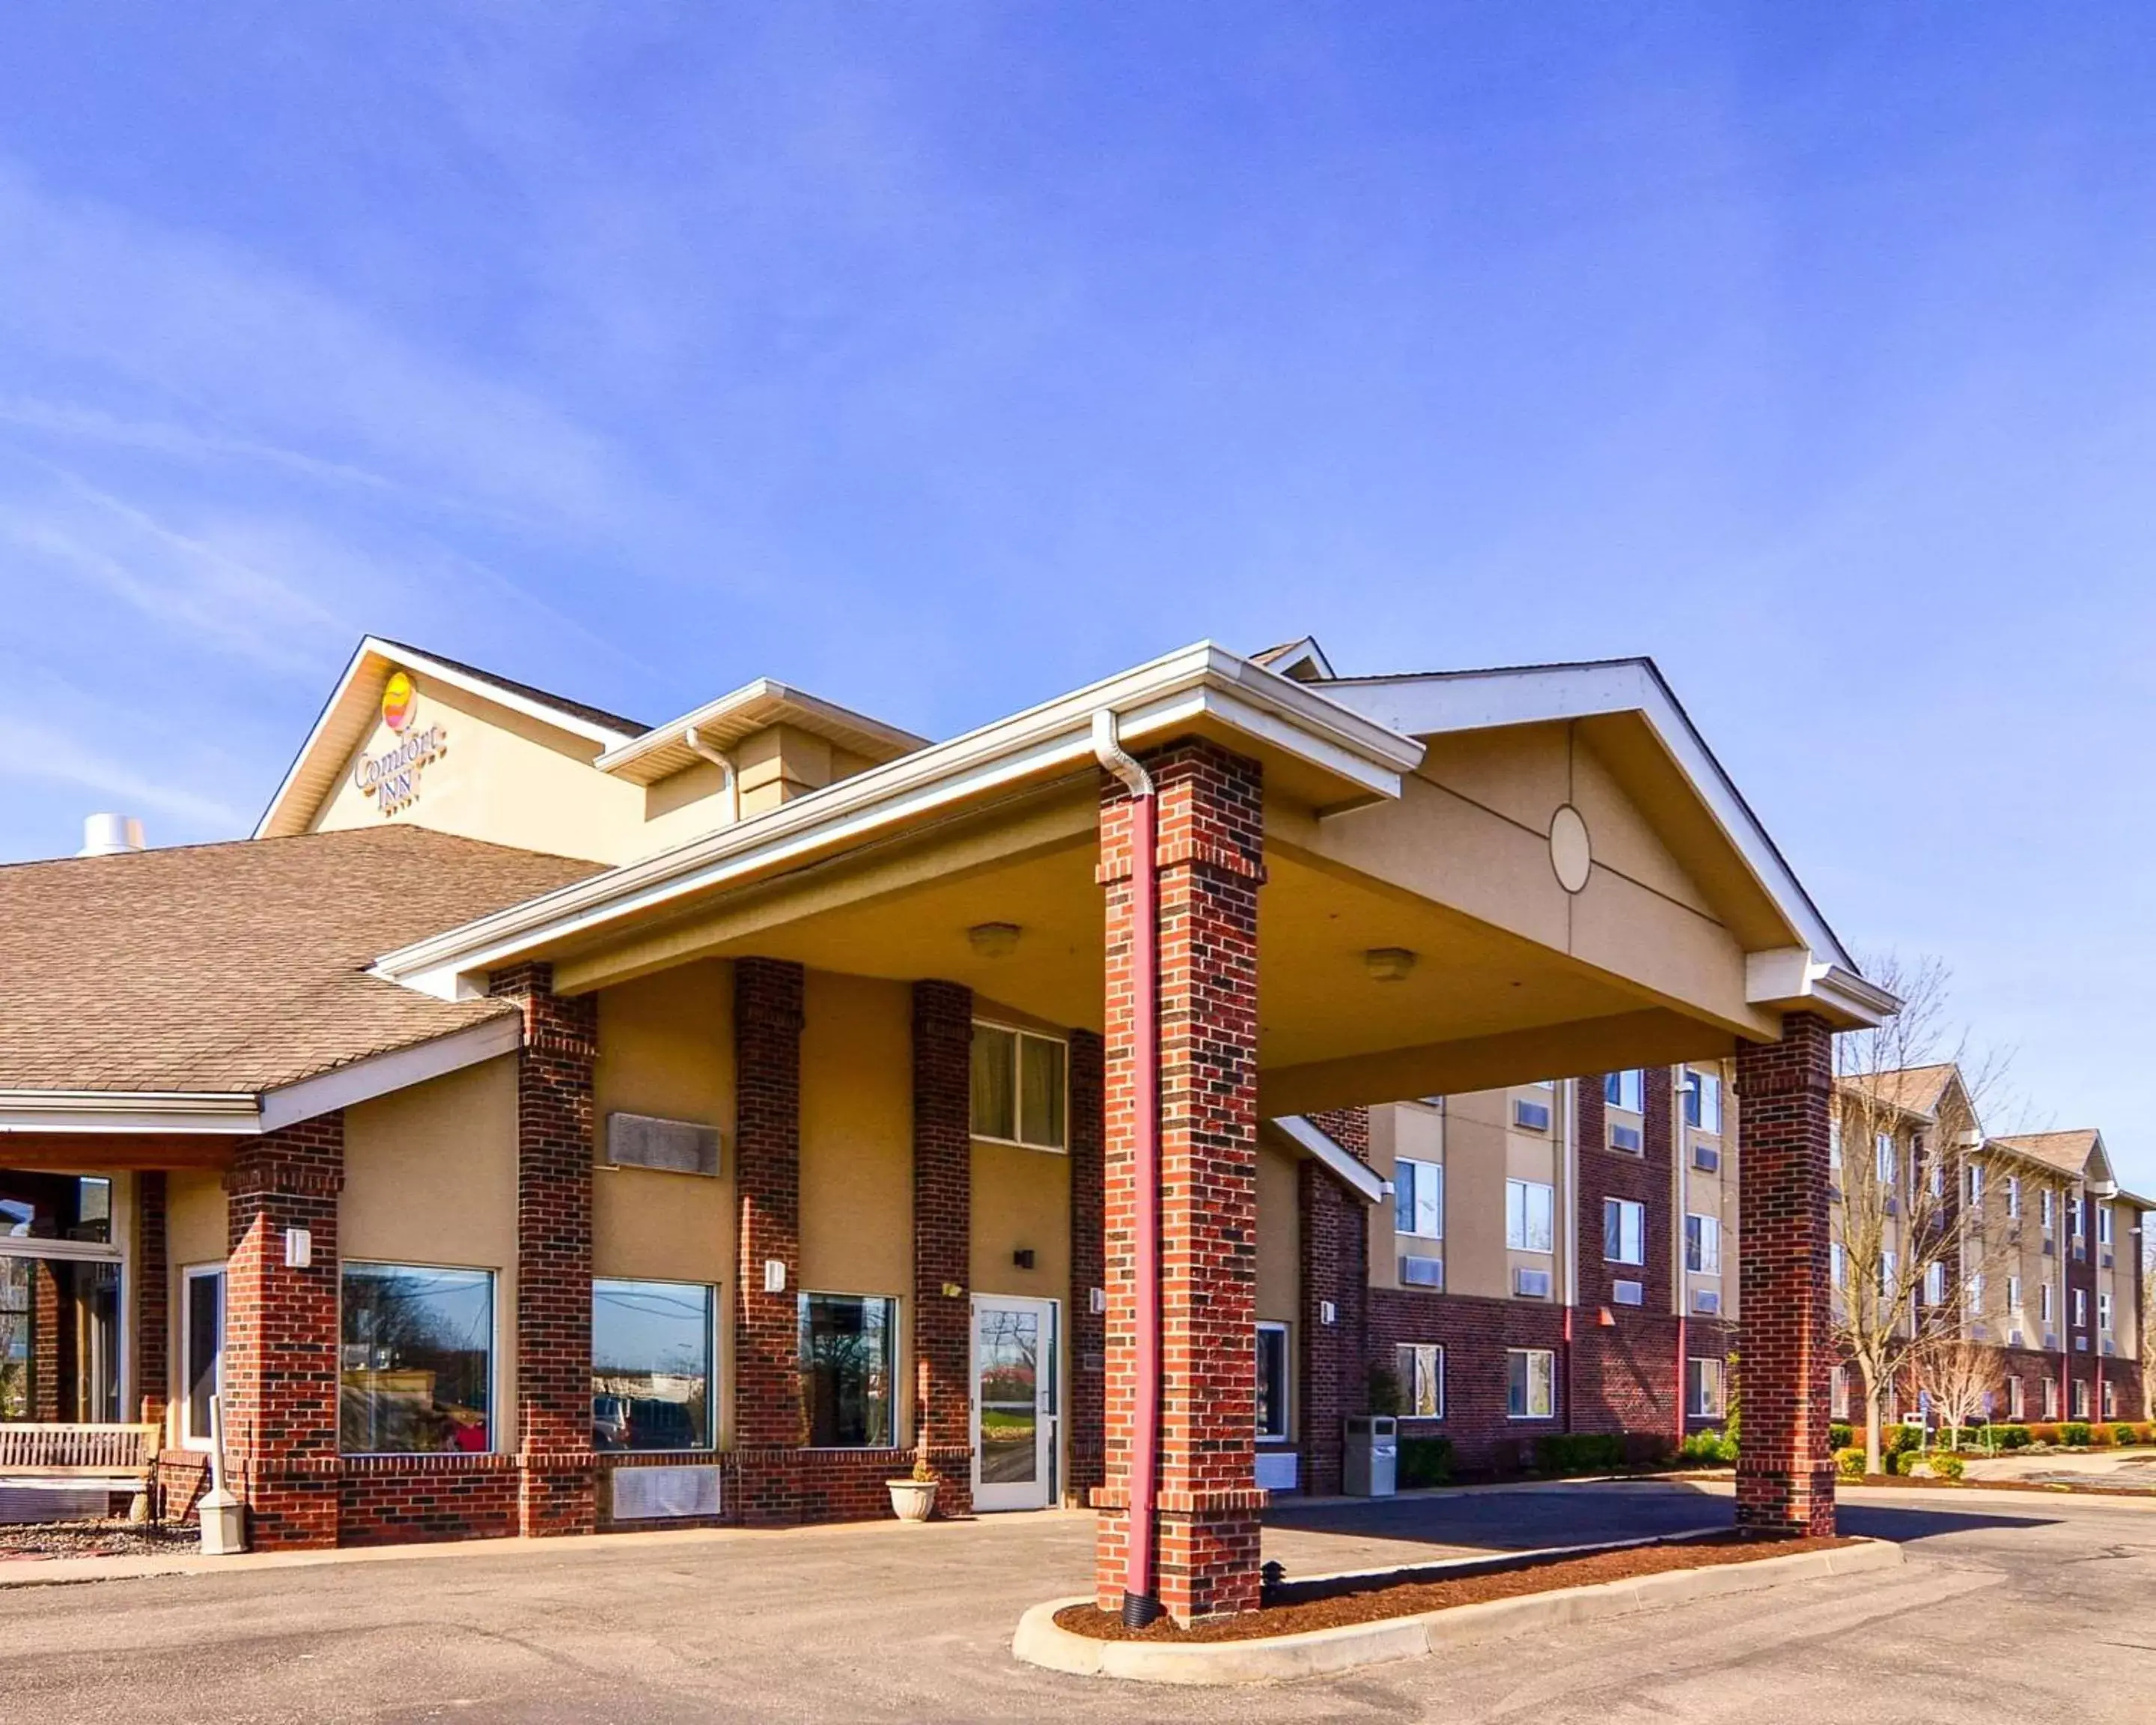 Property Building in Comfort Inn Weirton